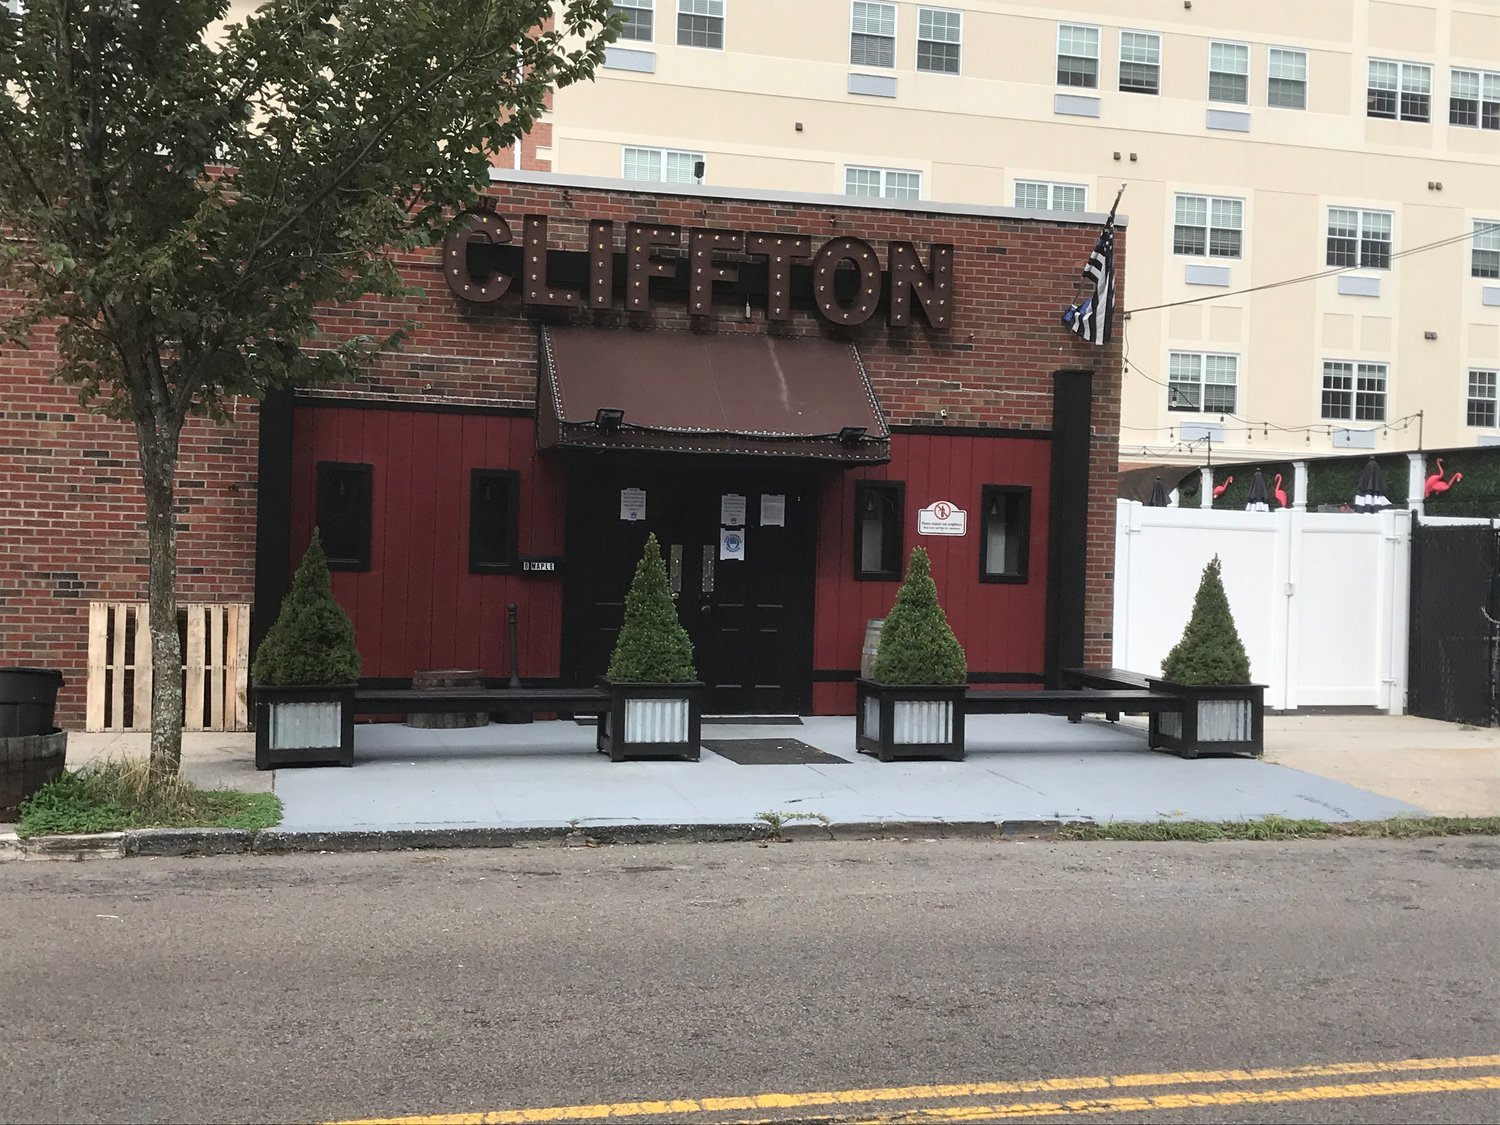 The Cliffton finds itself at the root of another problem, this time with neighbors.